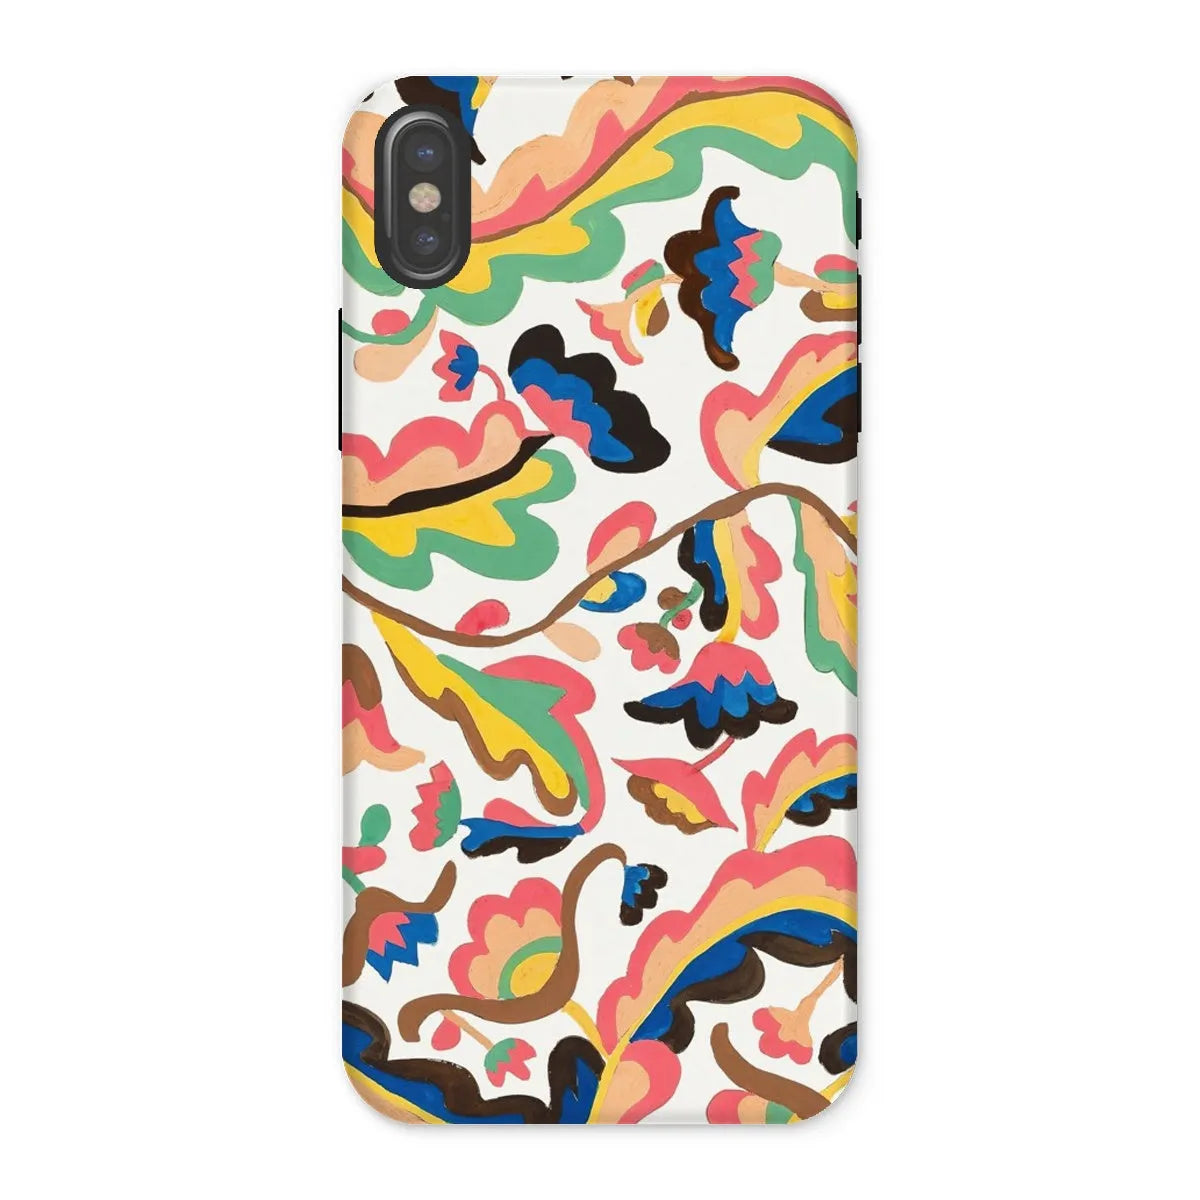 Colcha Floral Aesthetic Pattern Phone Case - Etna Wiswall - Iphone x / Matte - Mobile Phone Cases - Aesthetic Art